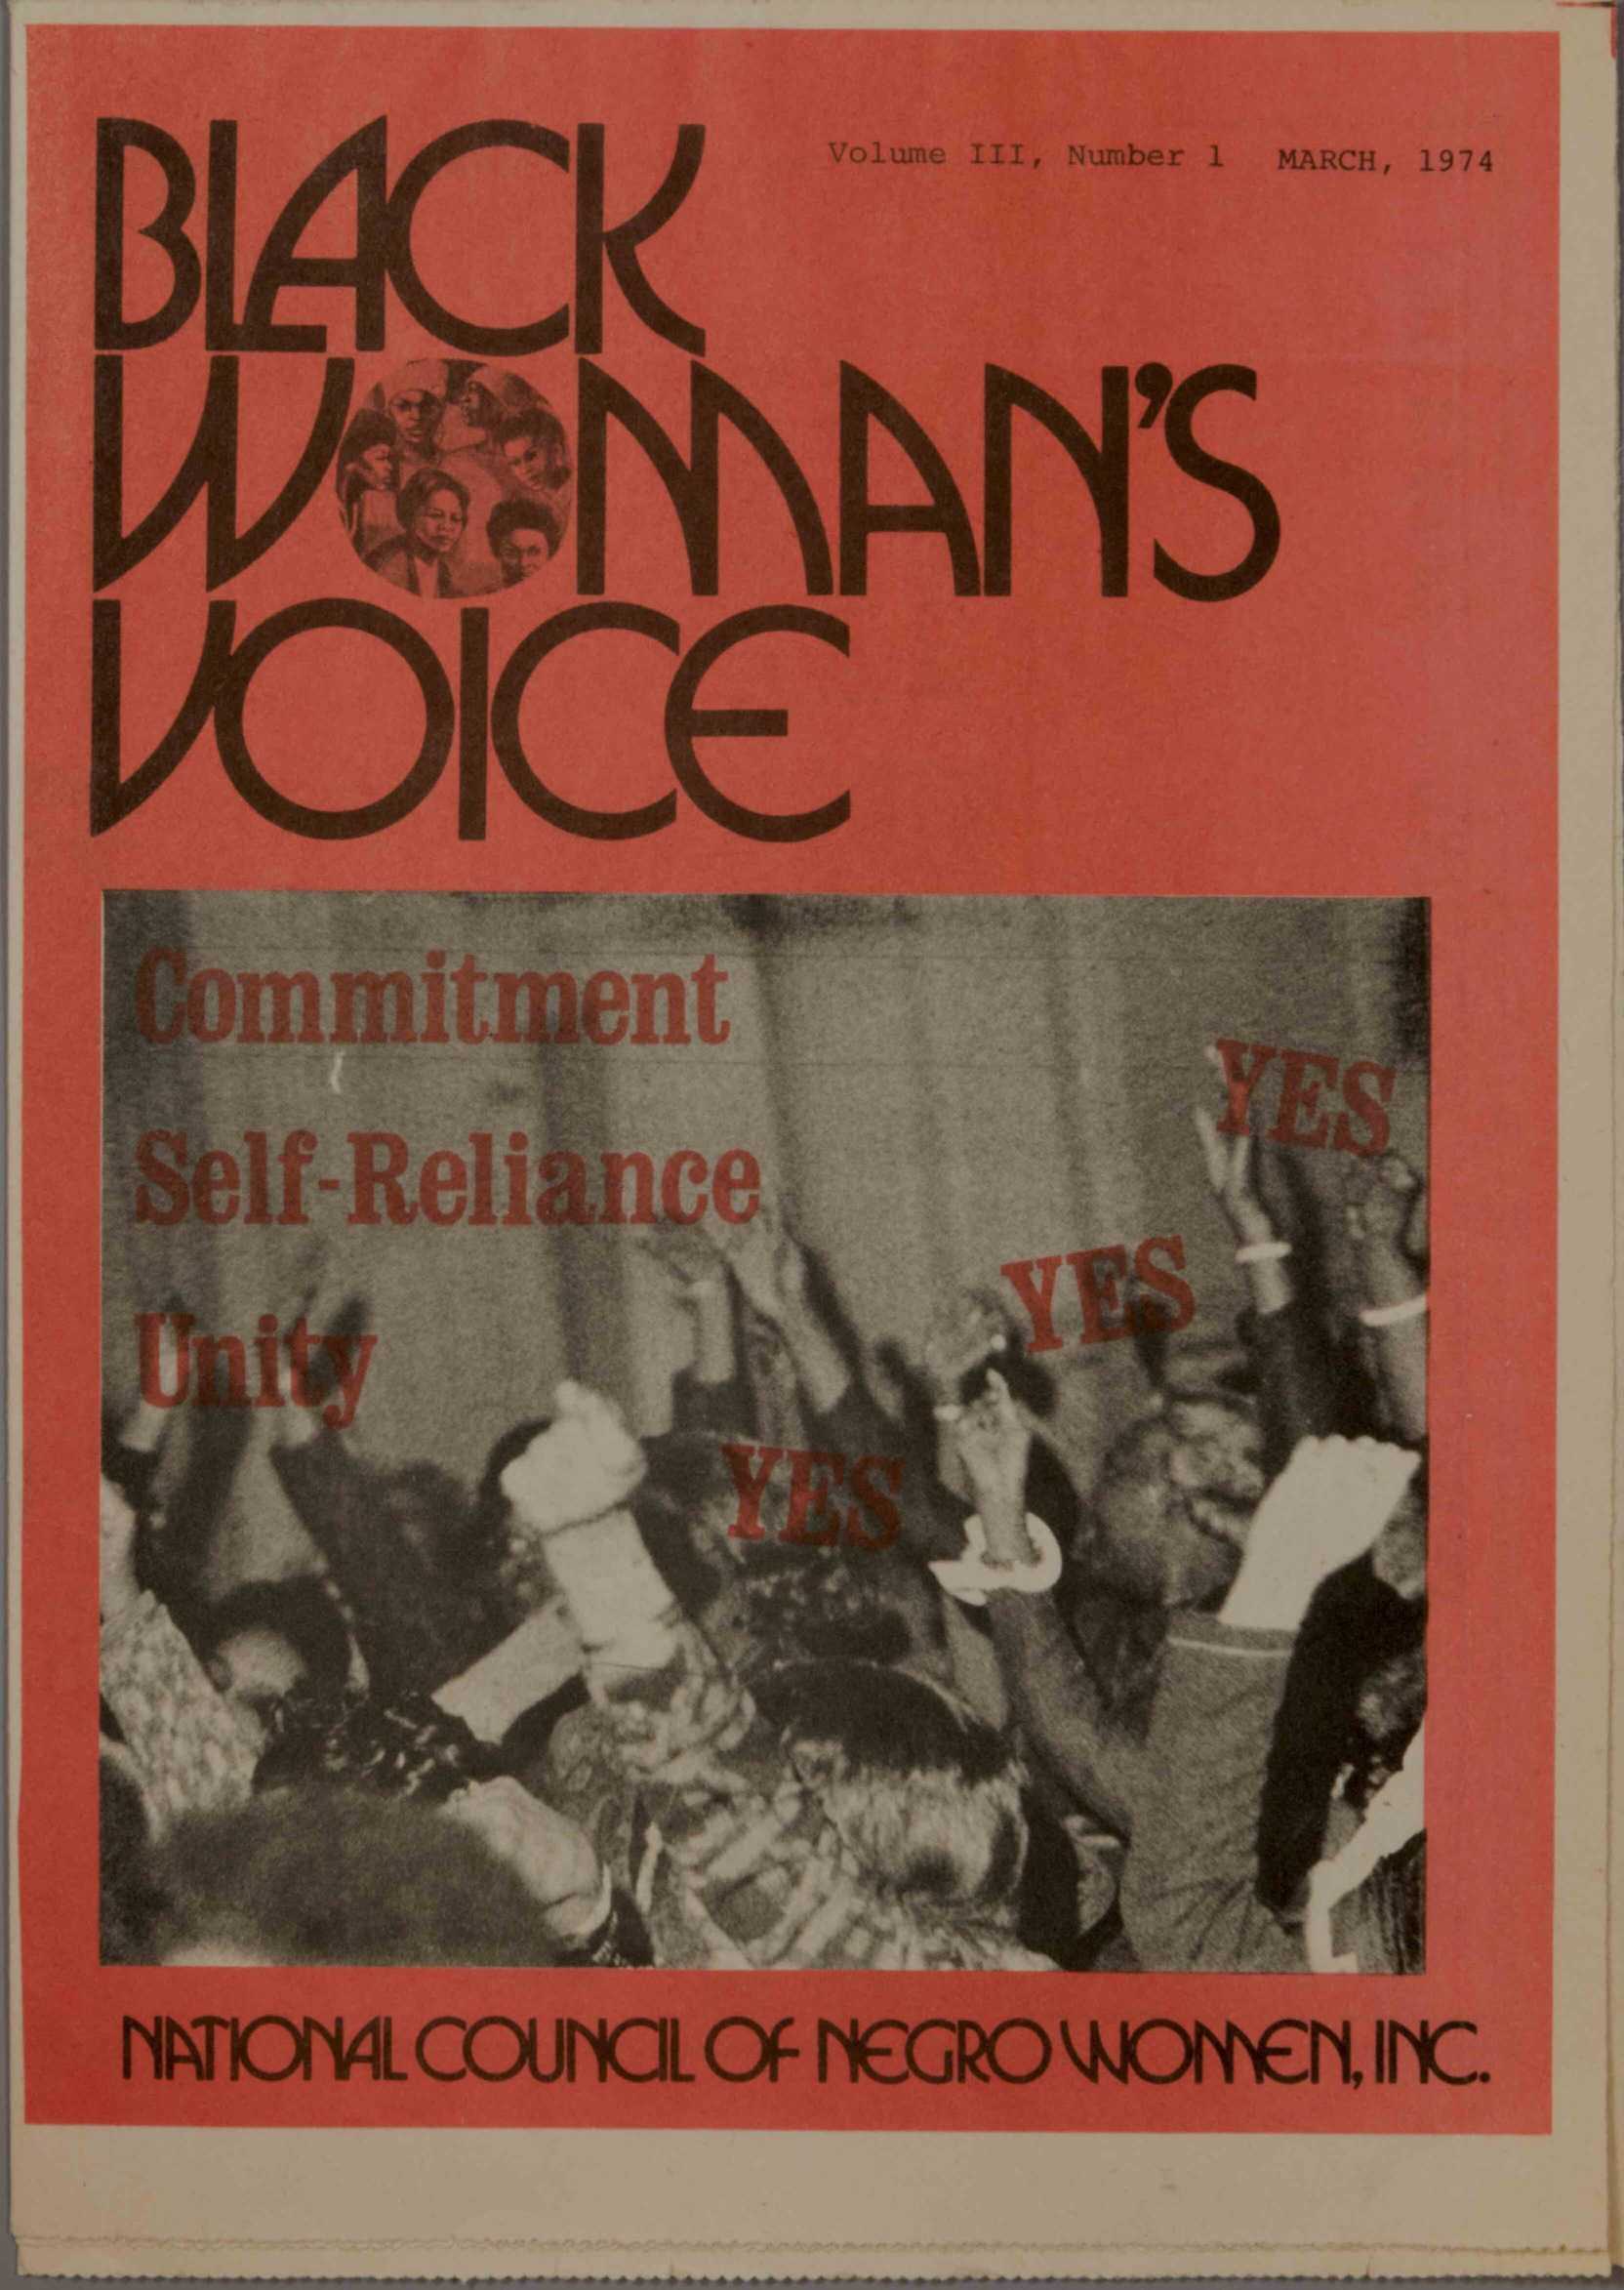 Cover of Black Woman's Voice, Vol. III, No. 1. March, 1974